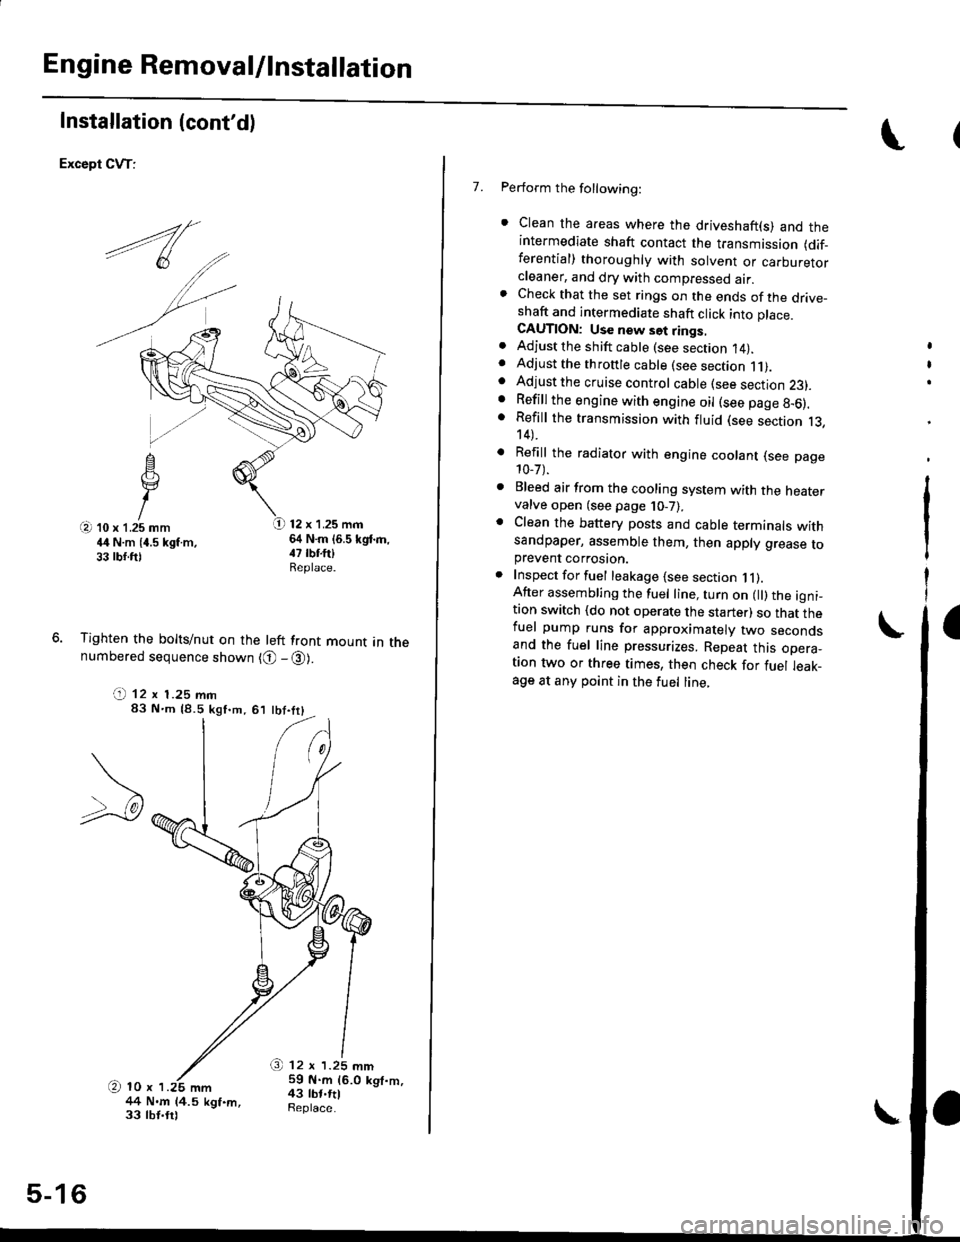 HONDA CIVIC 1997 6.G Workshop Manual Engine Removal/lnstallation
Installation (contd)
Except CVT:
12 x 1.25 mm64 N.m (6.5 kgd.m,
Tighten the bolts/nut on the left front mount in thenumbered sequence shown {O - @).
(t 12 x 1.25 mm83 Nm 